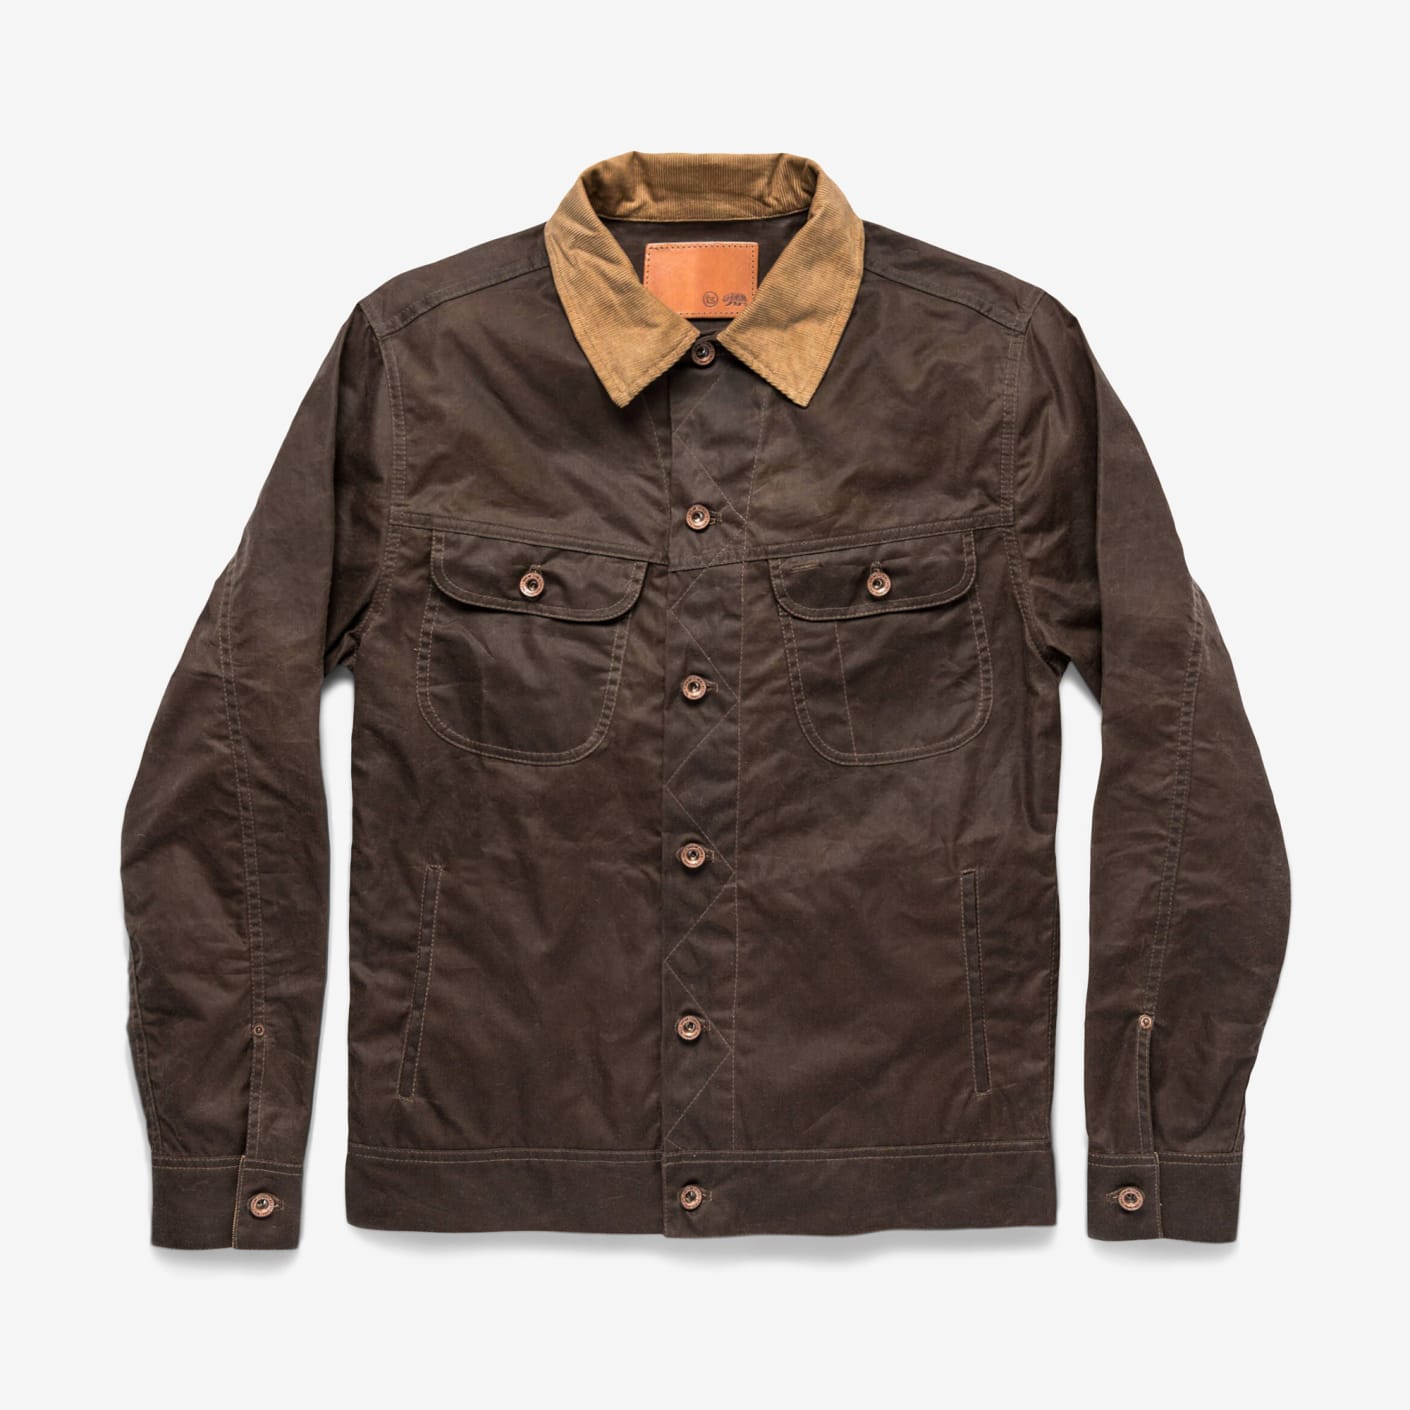 Taylor Stitch The Long Haul Jacket – Tobacco Waxed Canvas | Bespoke Post